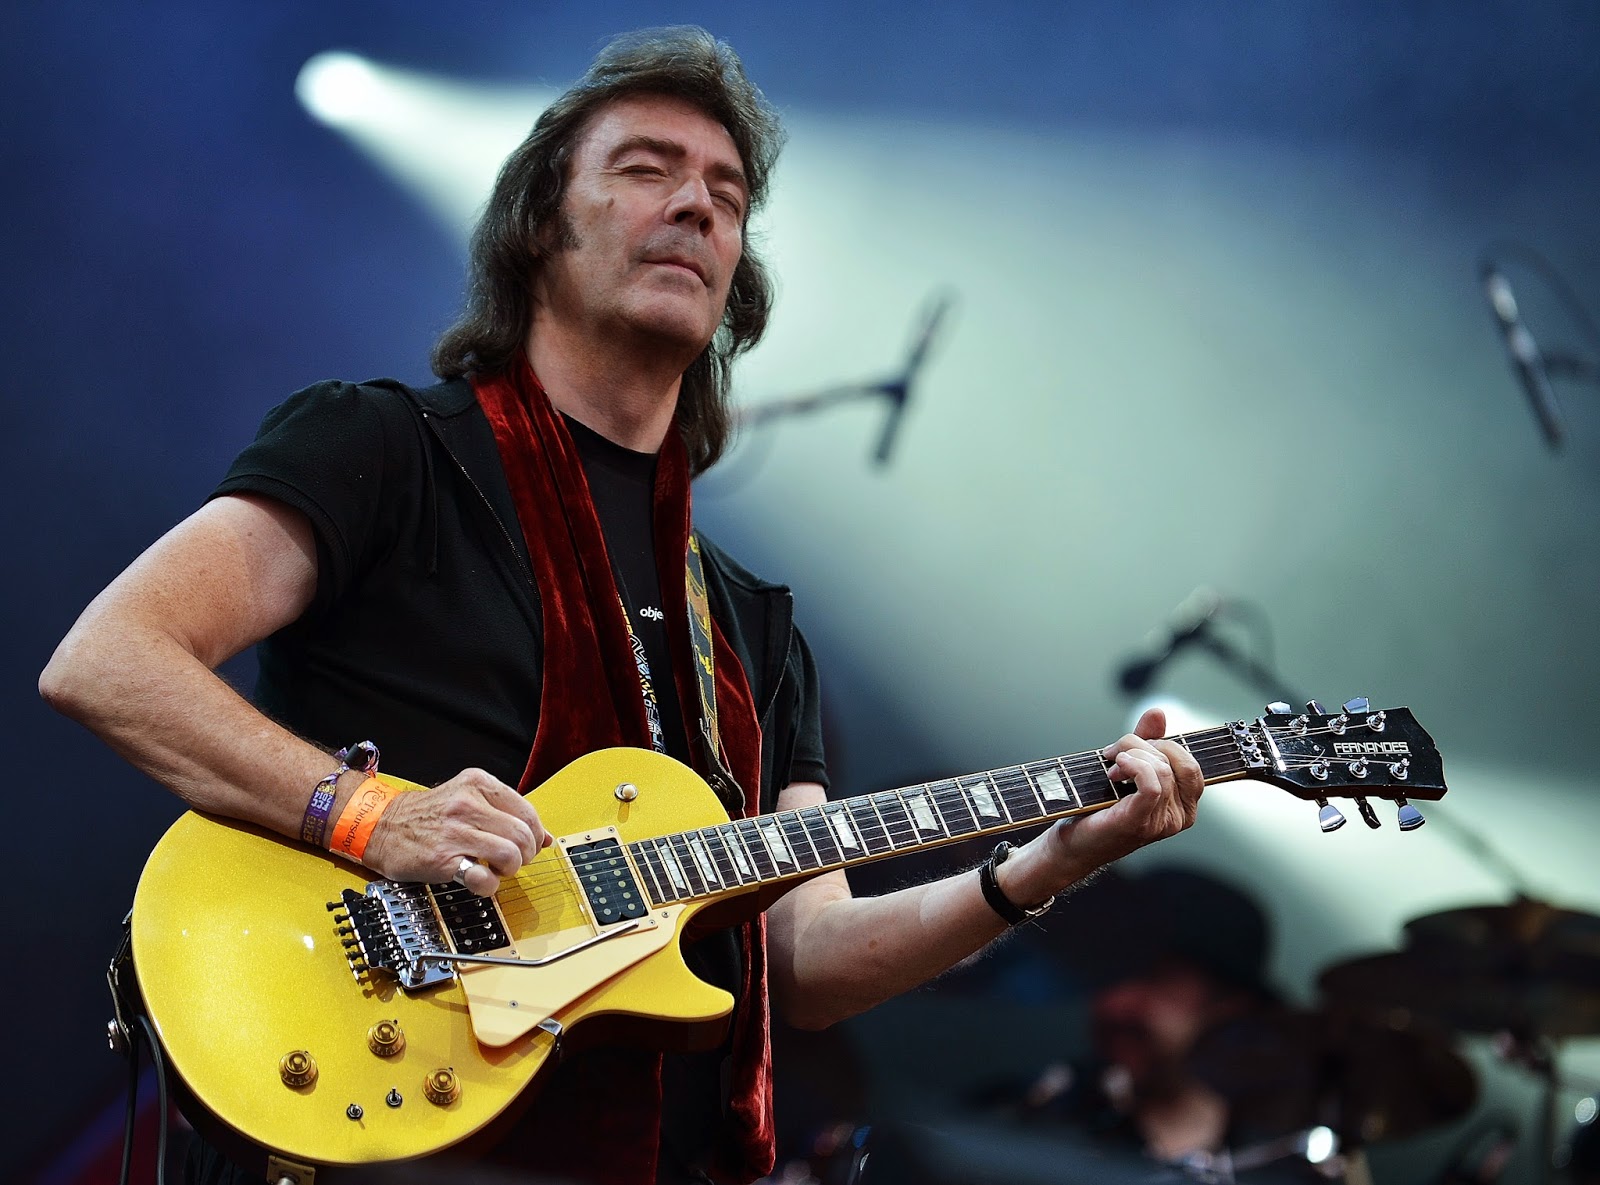 Island Zone Update: Steve Hackett: This Is What Genius Sounds Like